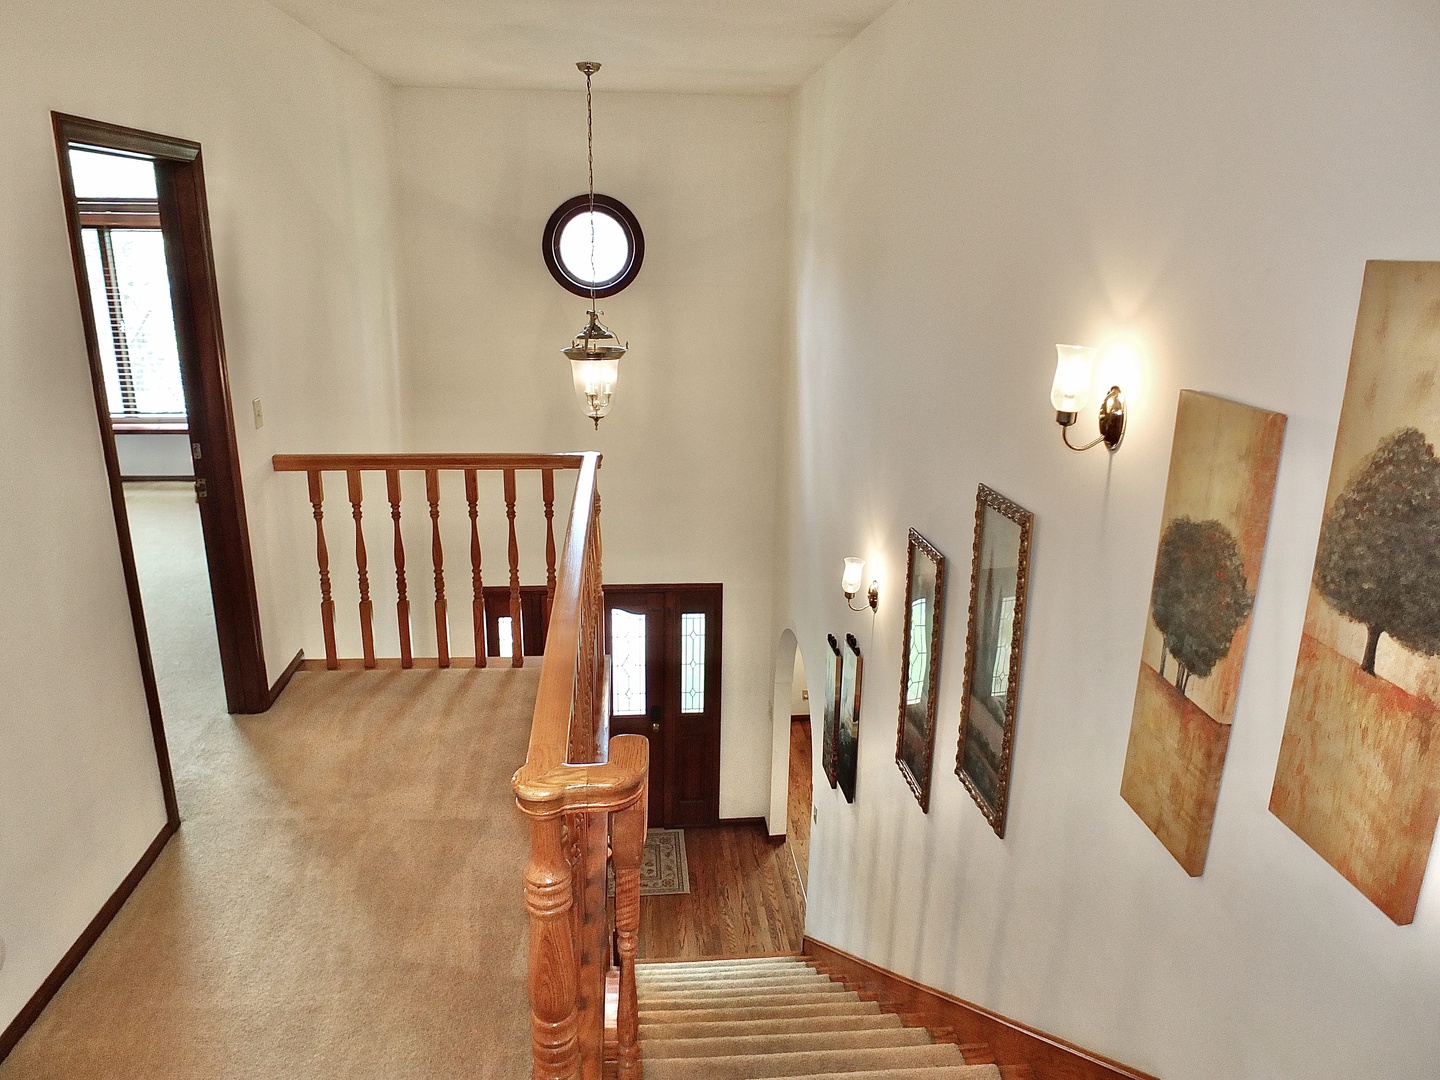 Staircase from the 2nd floor